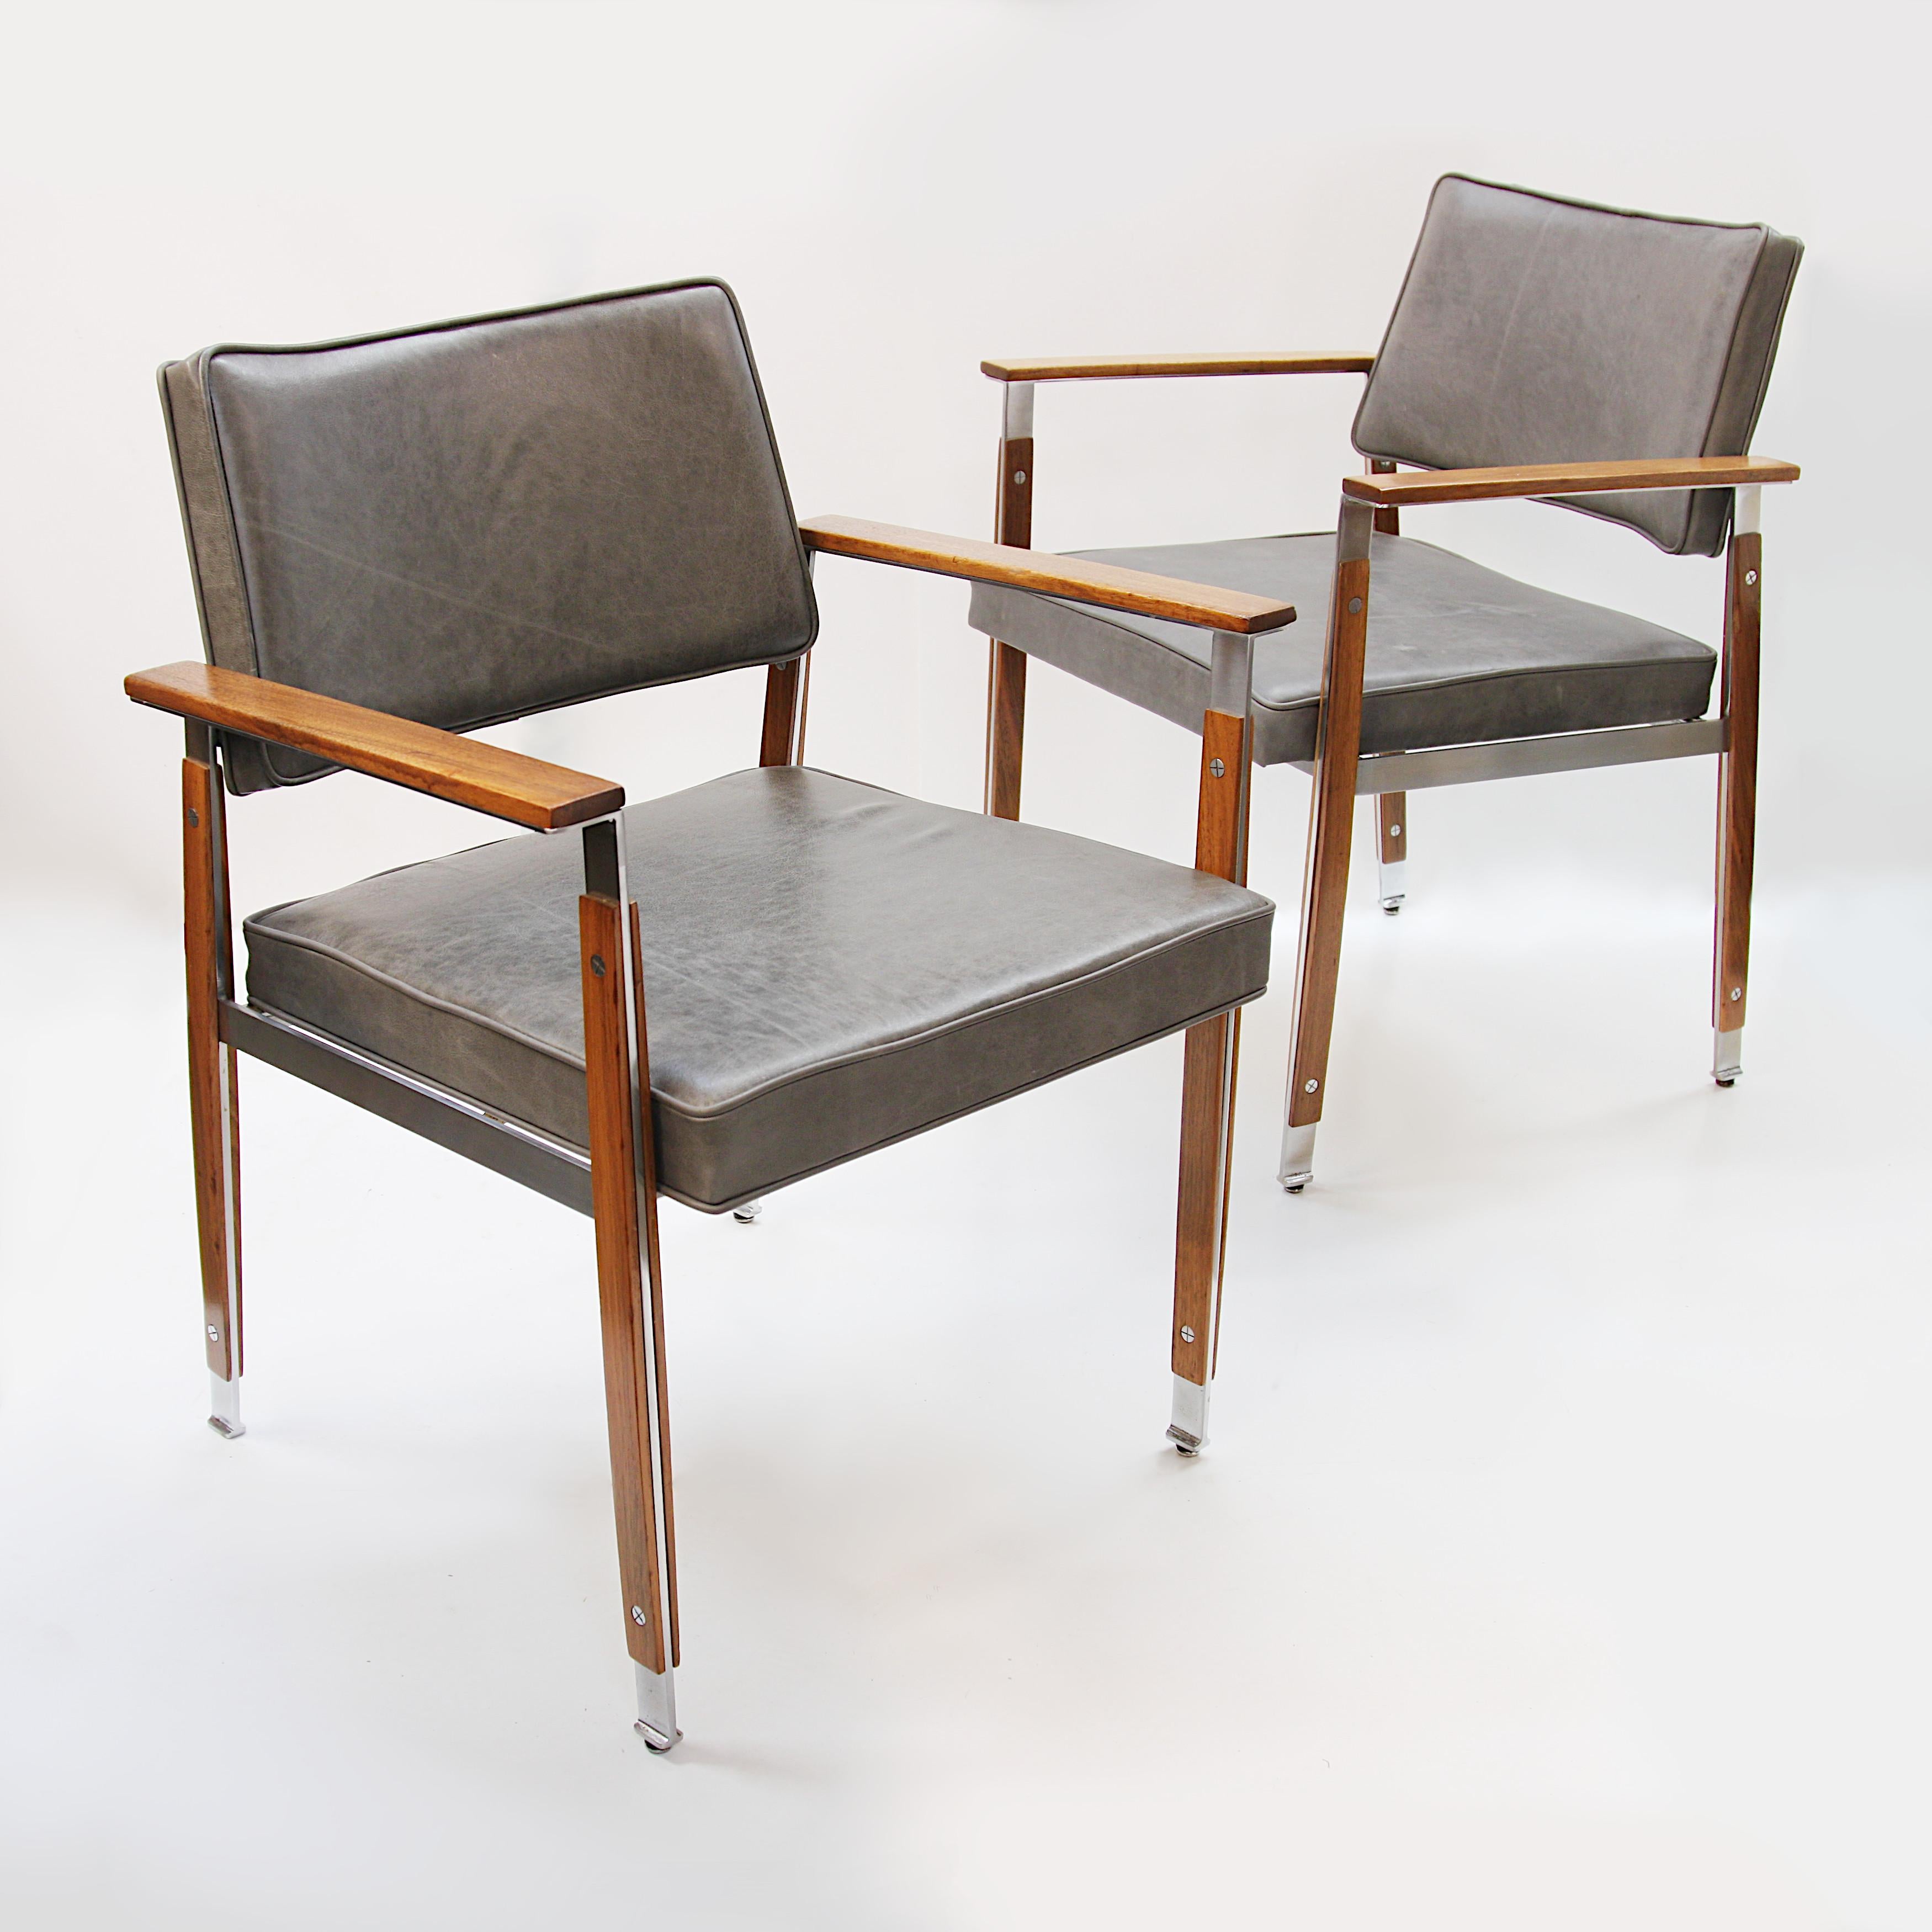 Rare pair of armchairs designed by William B Sklaroff for the ultra five group line of furniture by the Robert John Furniture Company. Chairs feature a very unique stainless steel frame clad in thin walnut slats reminiscent of a vintage Nardi